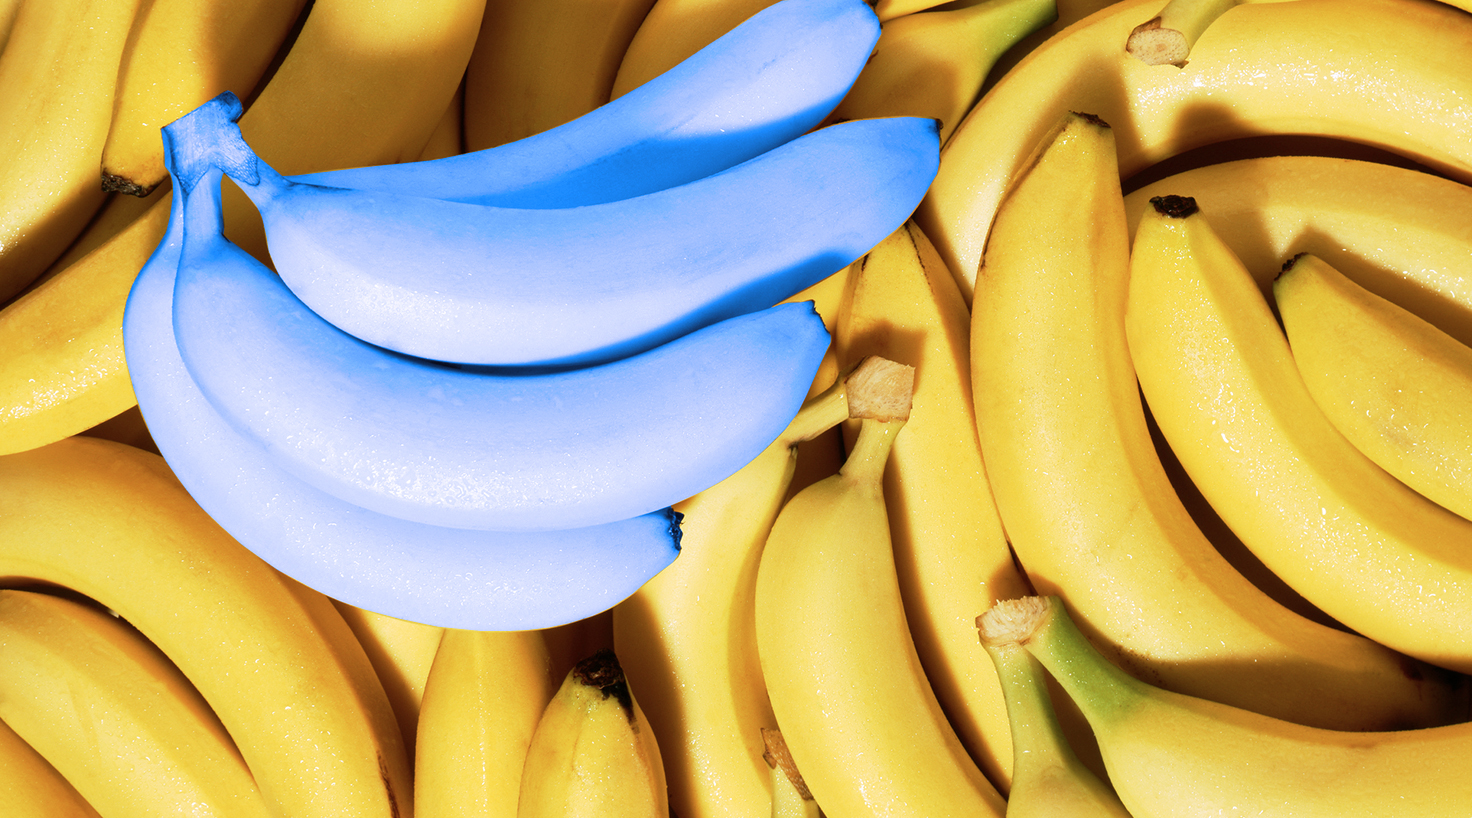 Blue Bananas That Taste Like Ice Cream Are Being Sold,Best Hangover Cure 2019